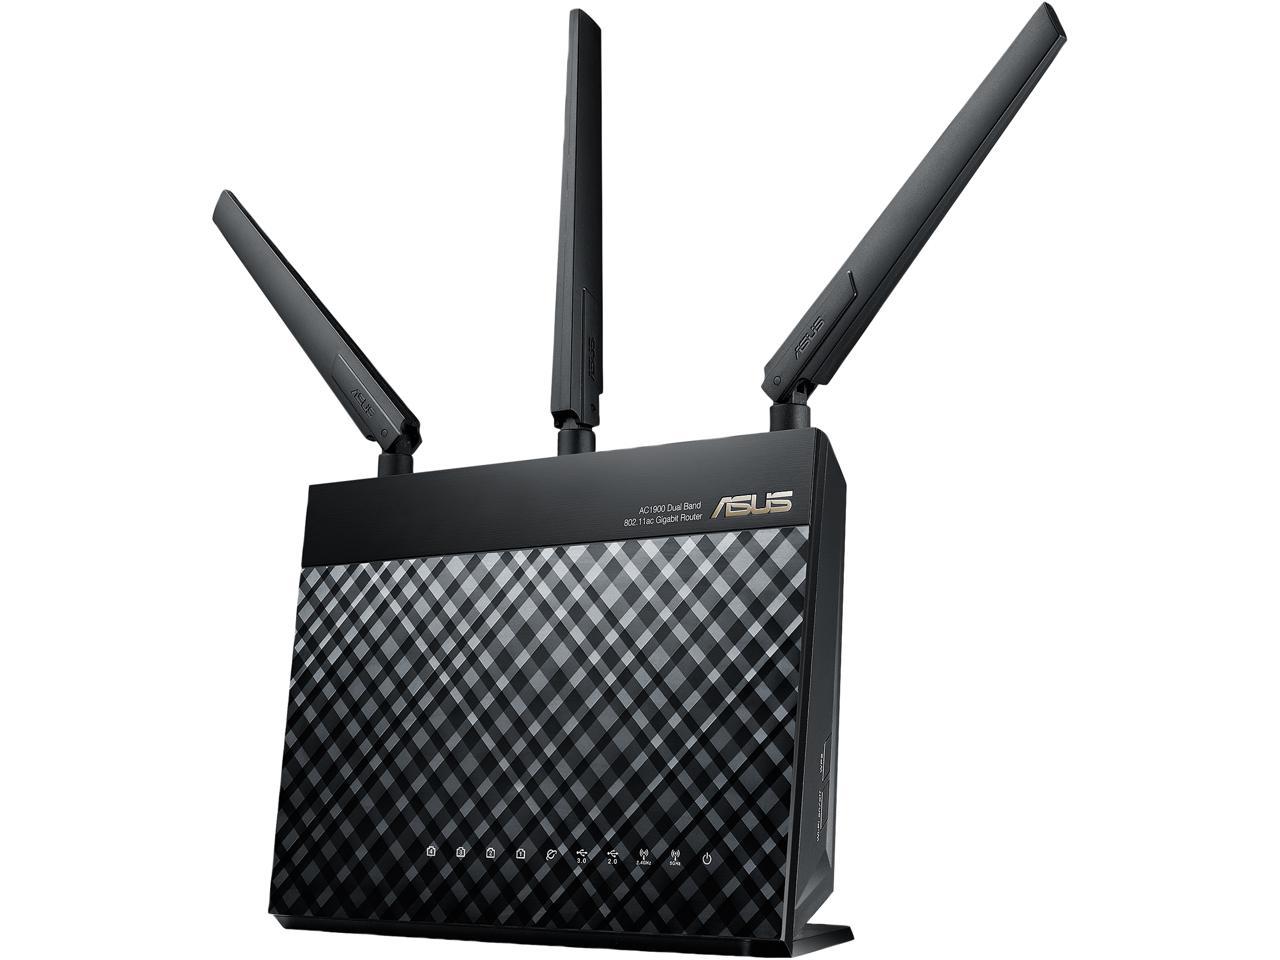 ASUS RT-AC1900P Dual Band Wireless Router with 5 Gigabit Ethernet Port